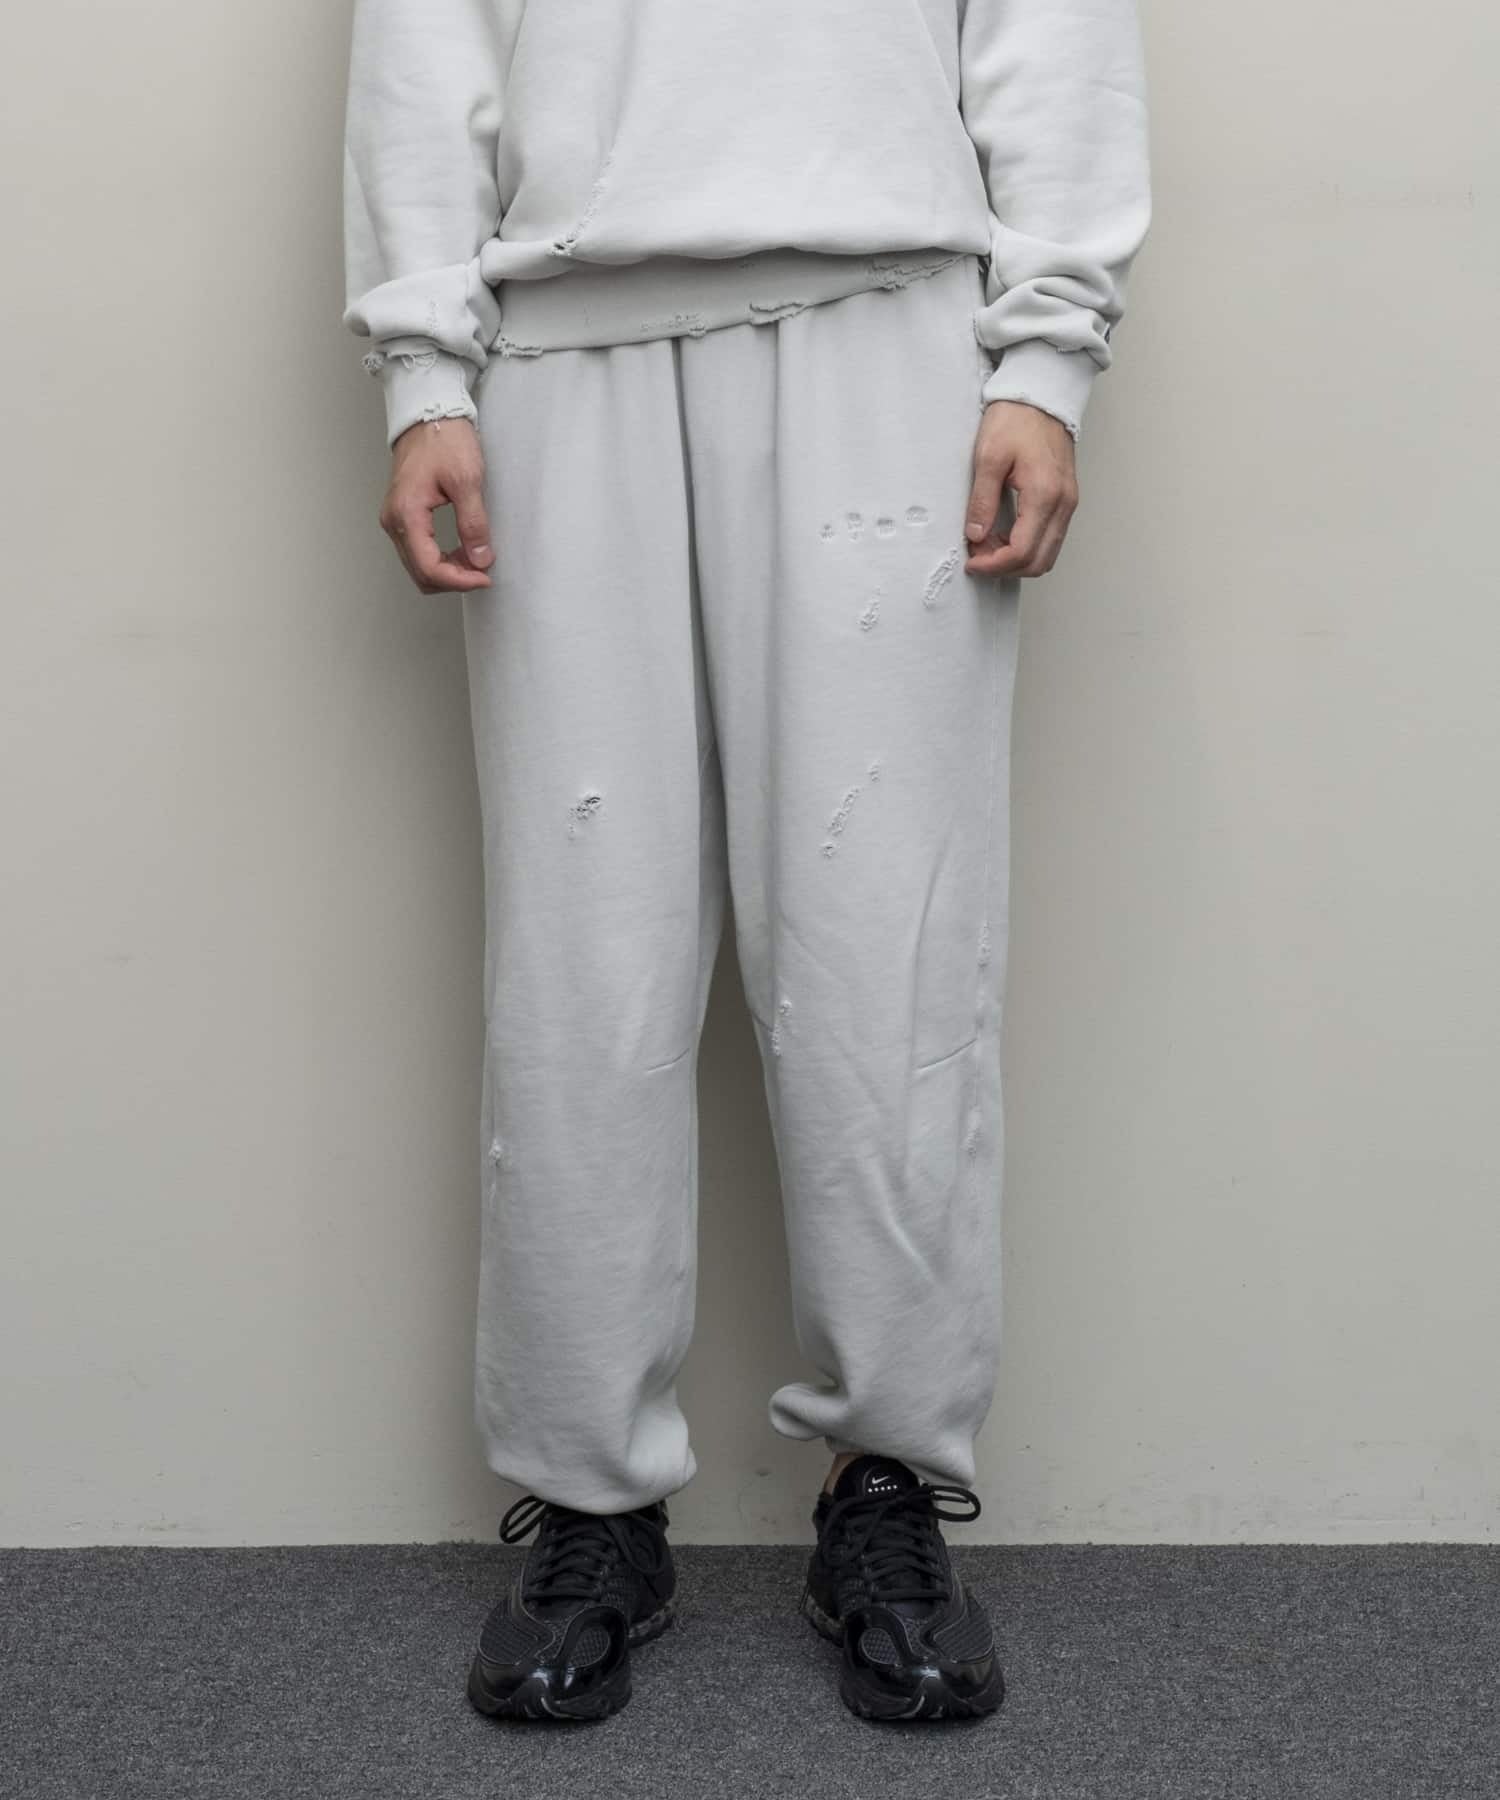 BAL / RUSSELL ATHLETIC  HIGH COTTON DISTRESSED  SWEATPANT